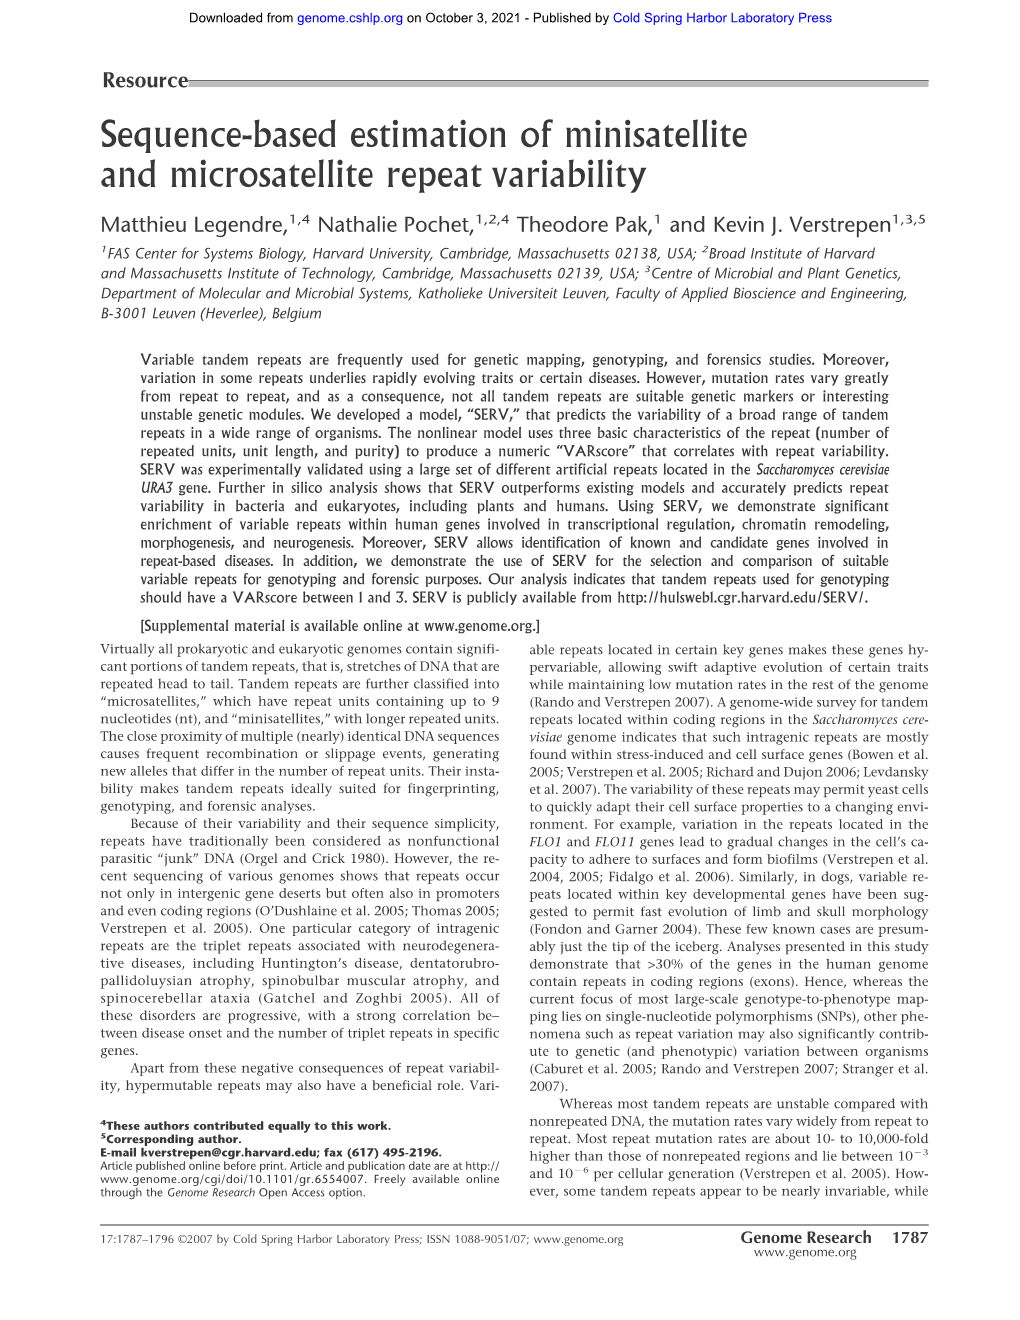 Sequence-Based Estimation of Minisatellite and Microsatellite Repeat Variability